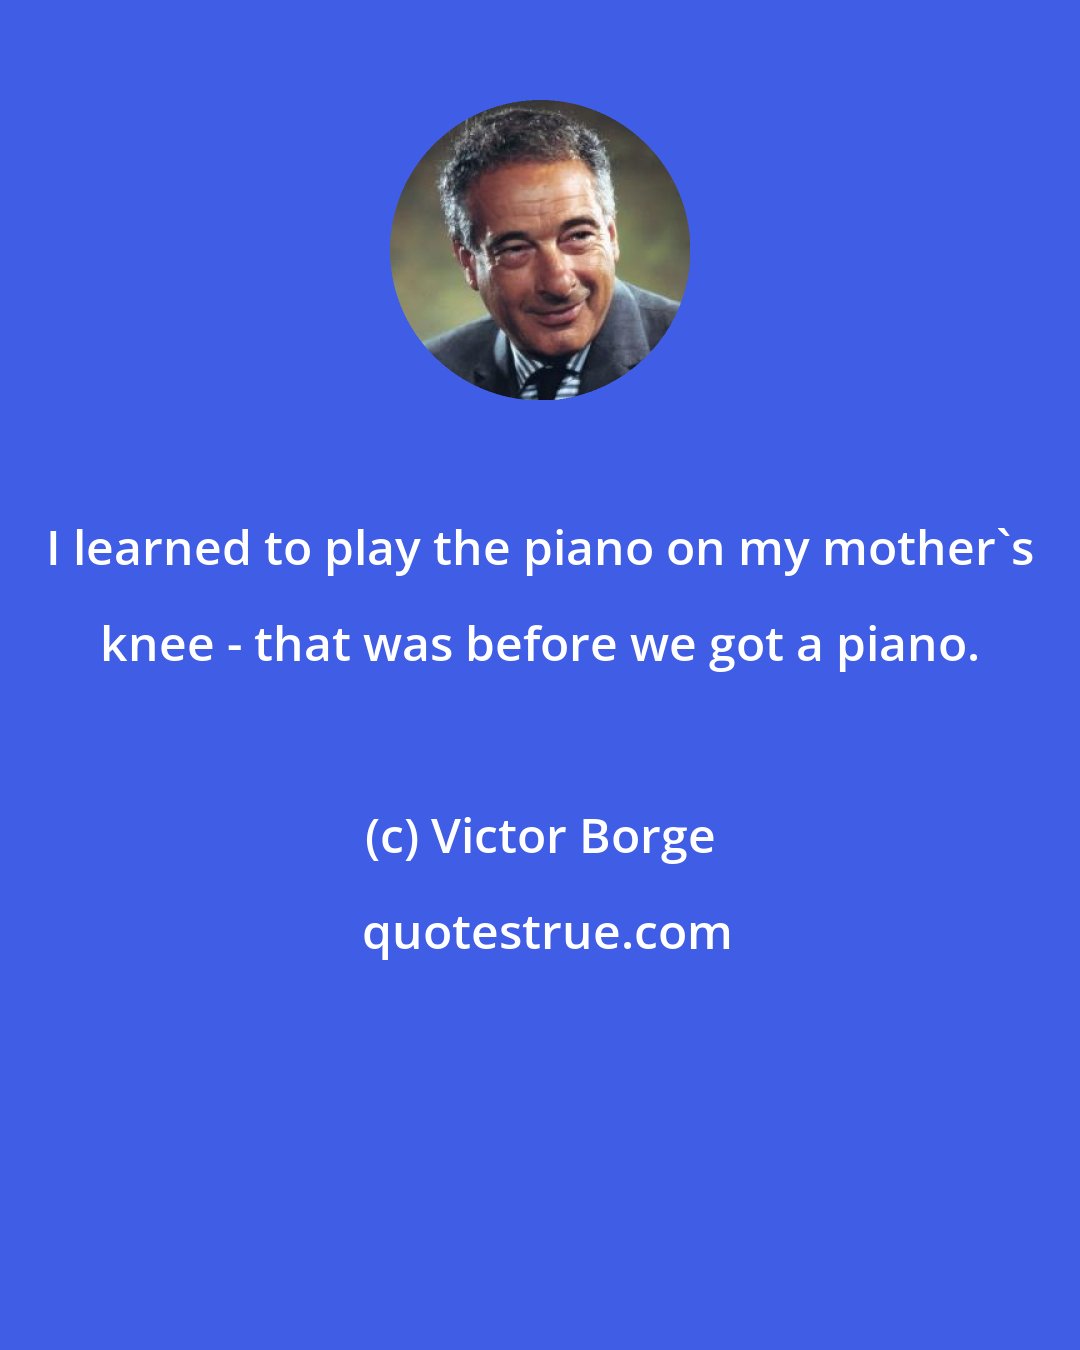 Victor Borge: I learned to play the piano on my mother's knee - that was before we got a piano.